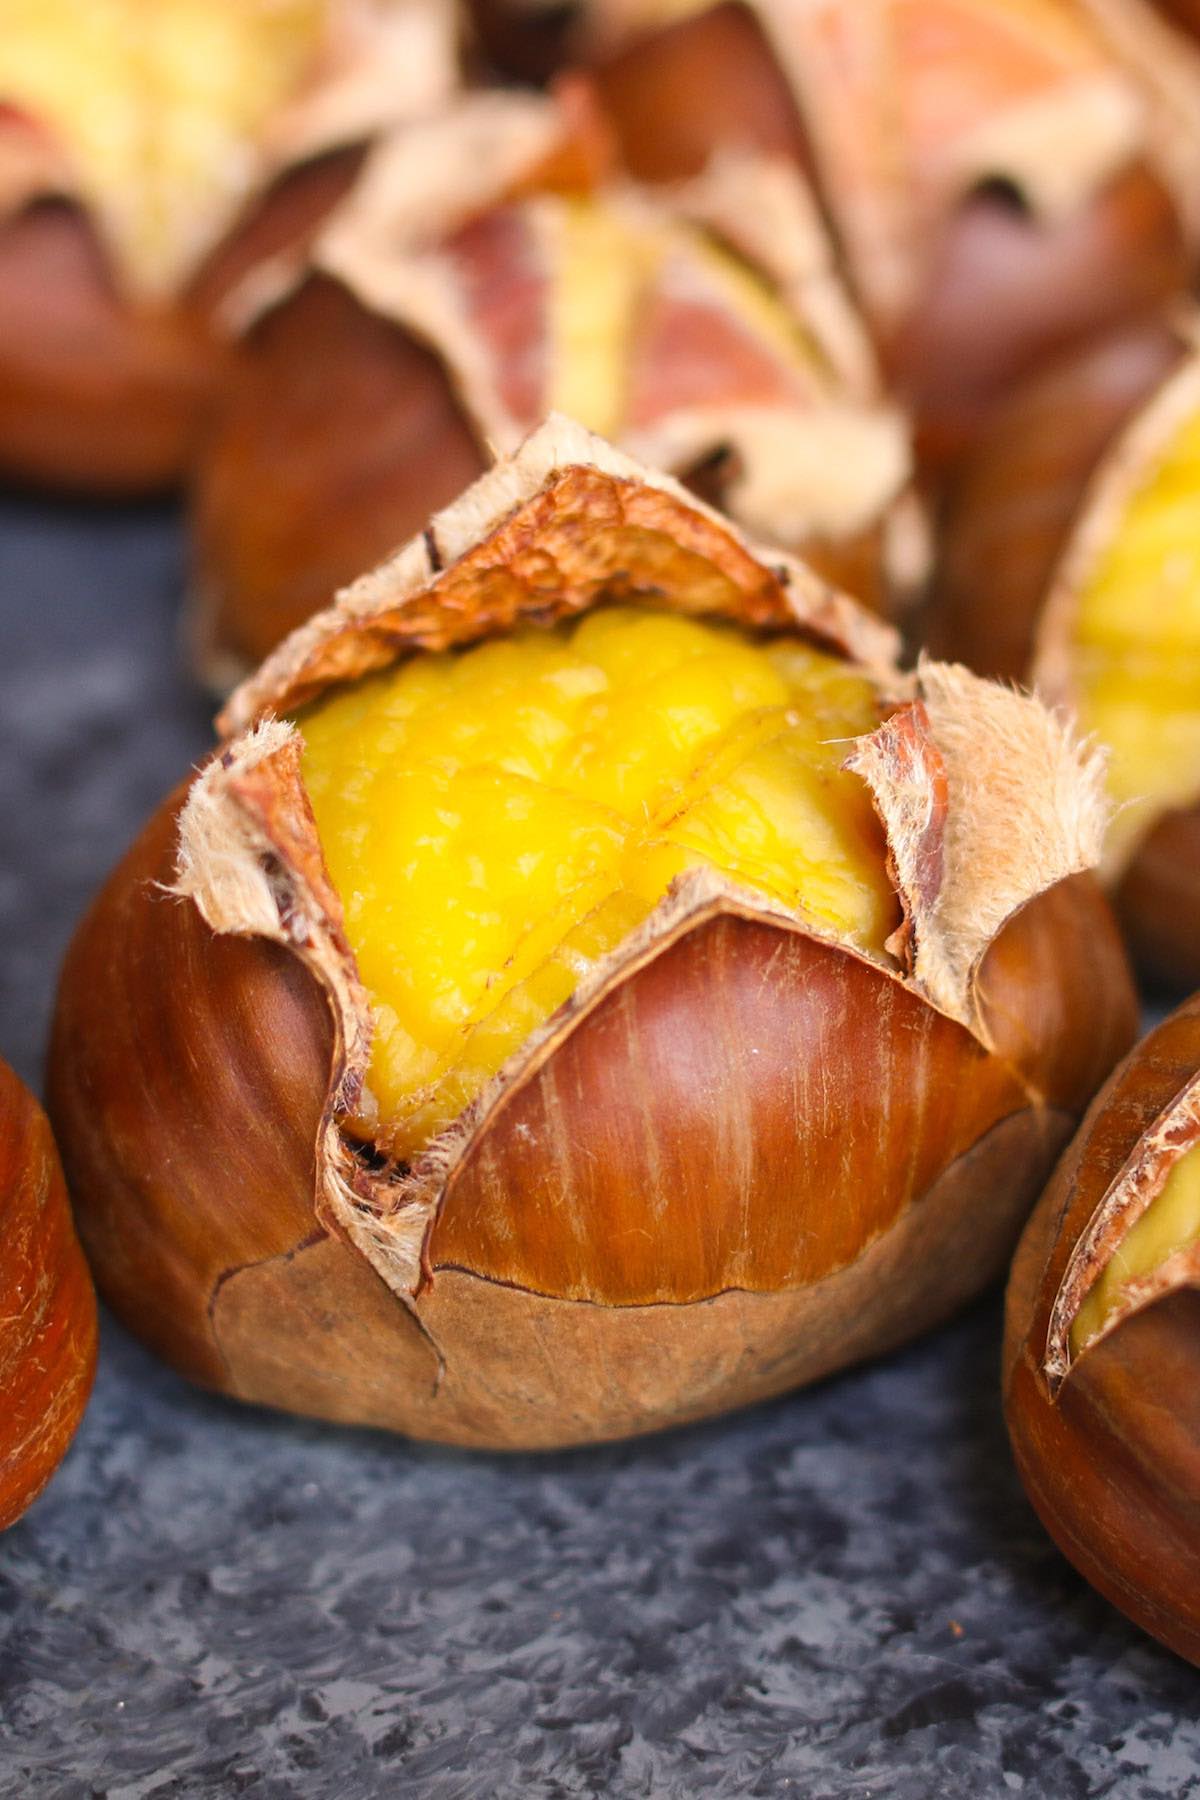 Roasted chestnuts are a healthy and hearty snack with a sweet, nutty flavor. Learn how to roast chestnuts in an oven, pan or on fire this holiday season. Scoring and soaking before roasting is the key to making this tree nut easier to eat. I’ll also show you how to peel skins easily so you can enjoy delicious chestnuts!